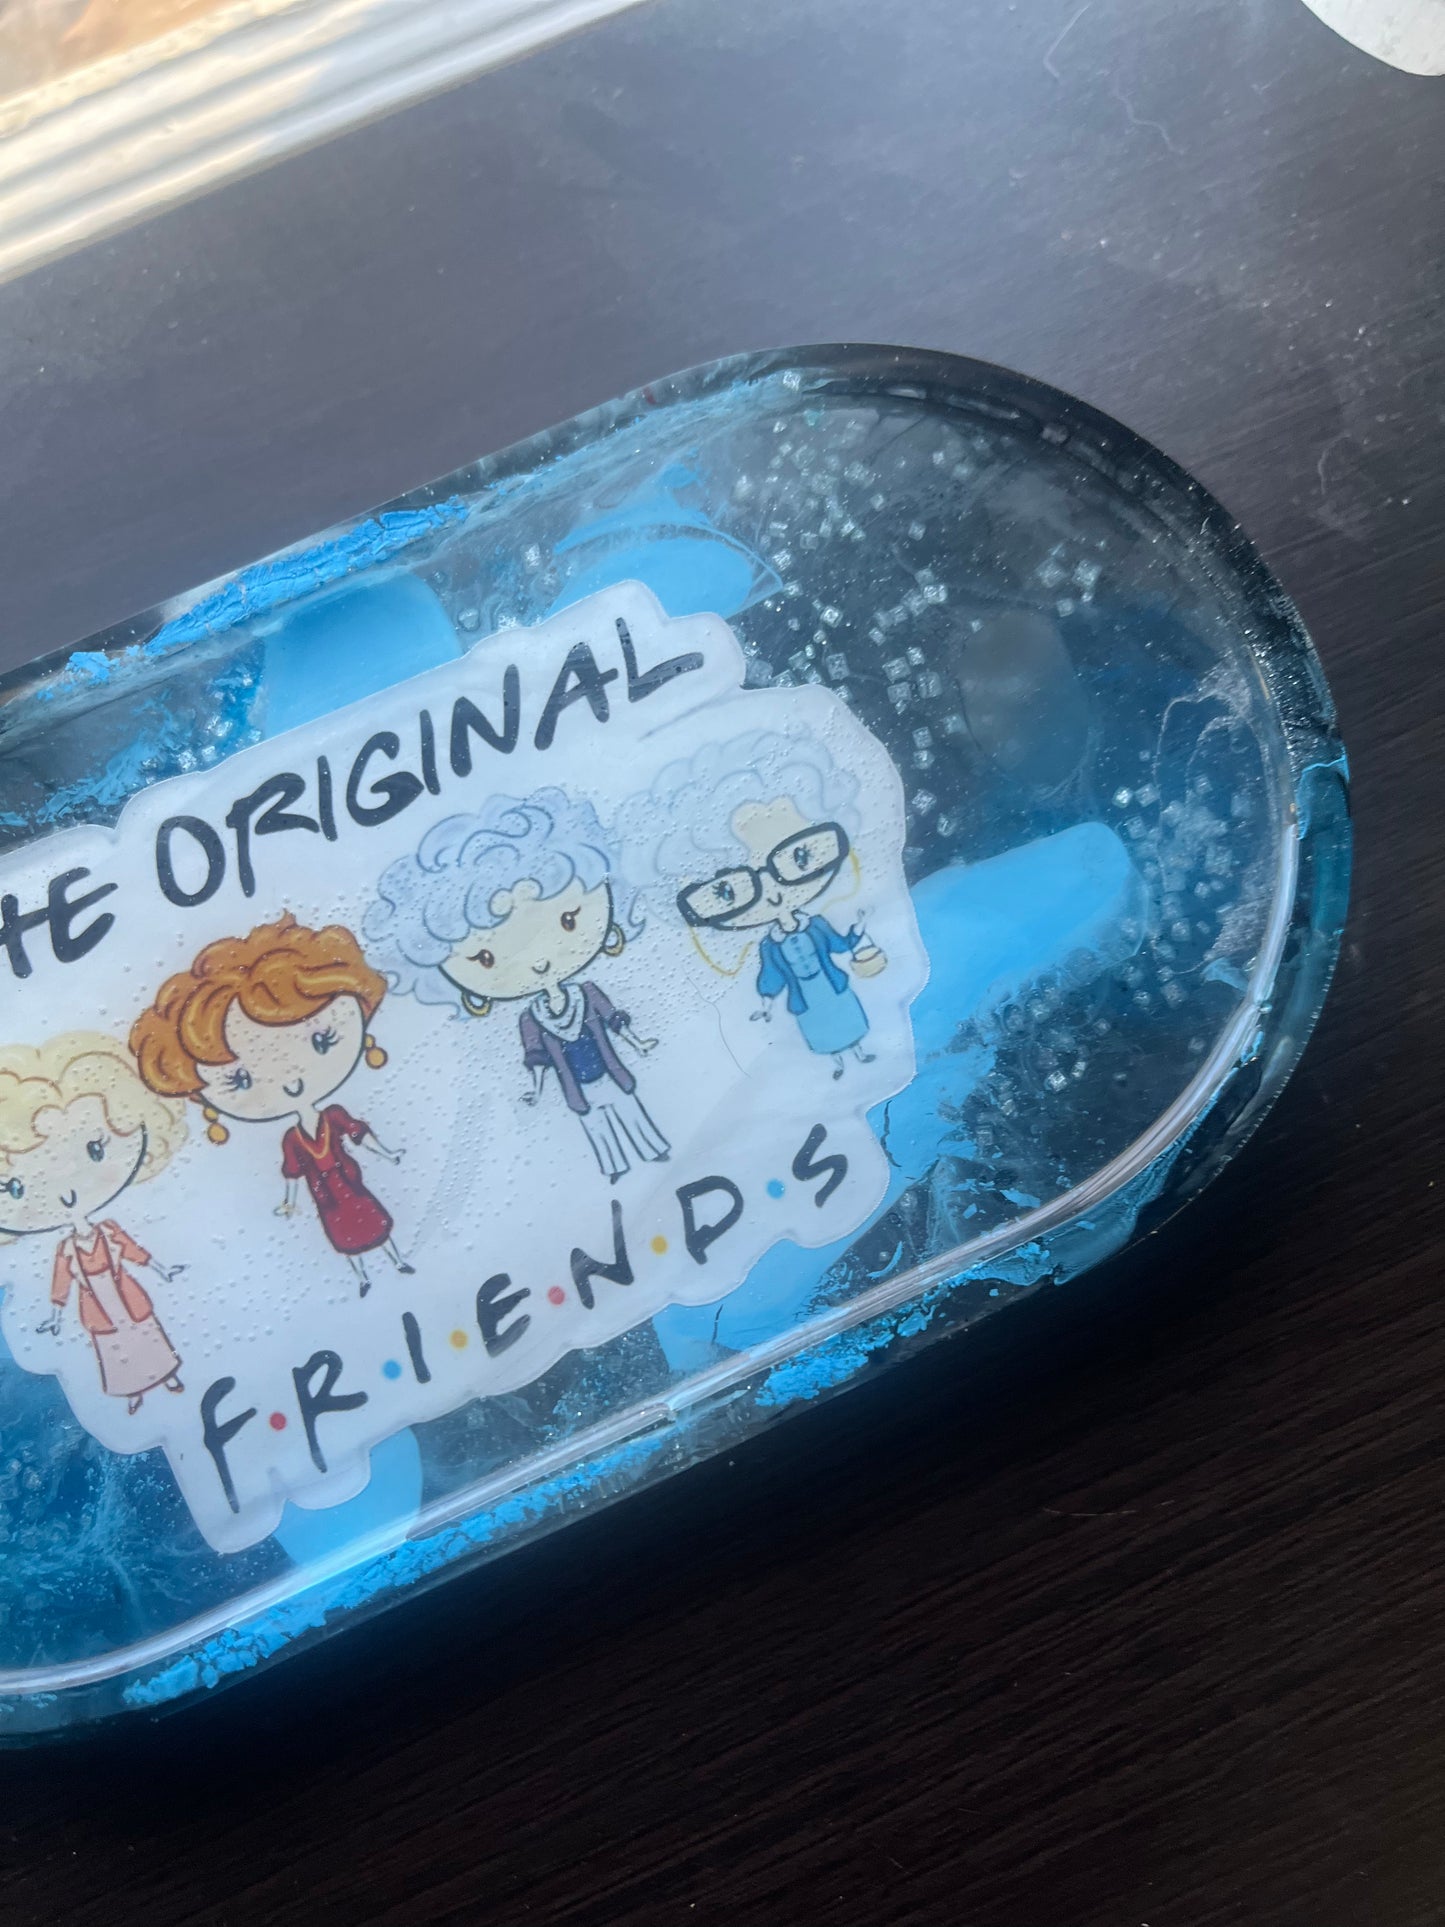 Resin Golden Girls Real Friends Blue Trinket Crystals Jewelry Arts Crafts Money Change Office Supplies Rolling Portable Multi Use Tray